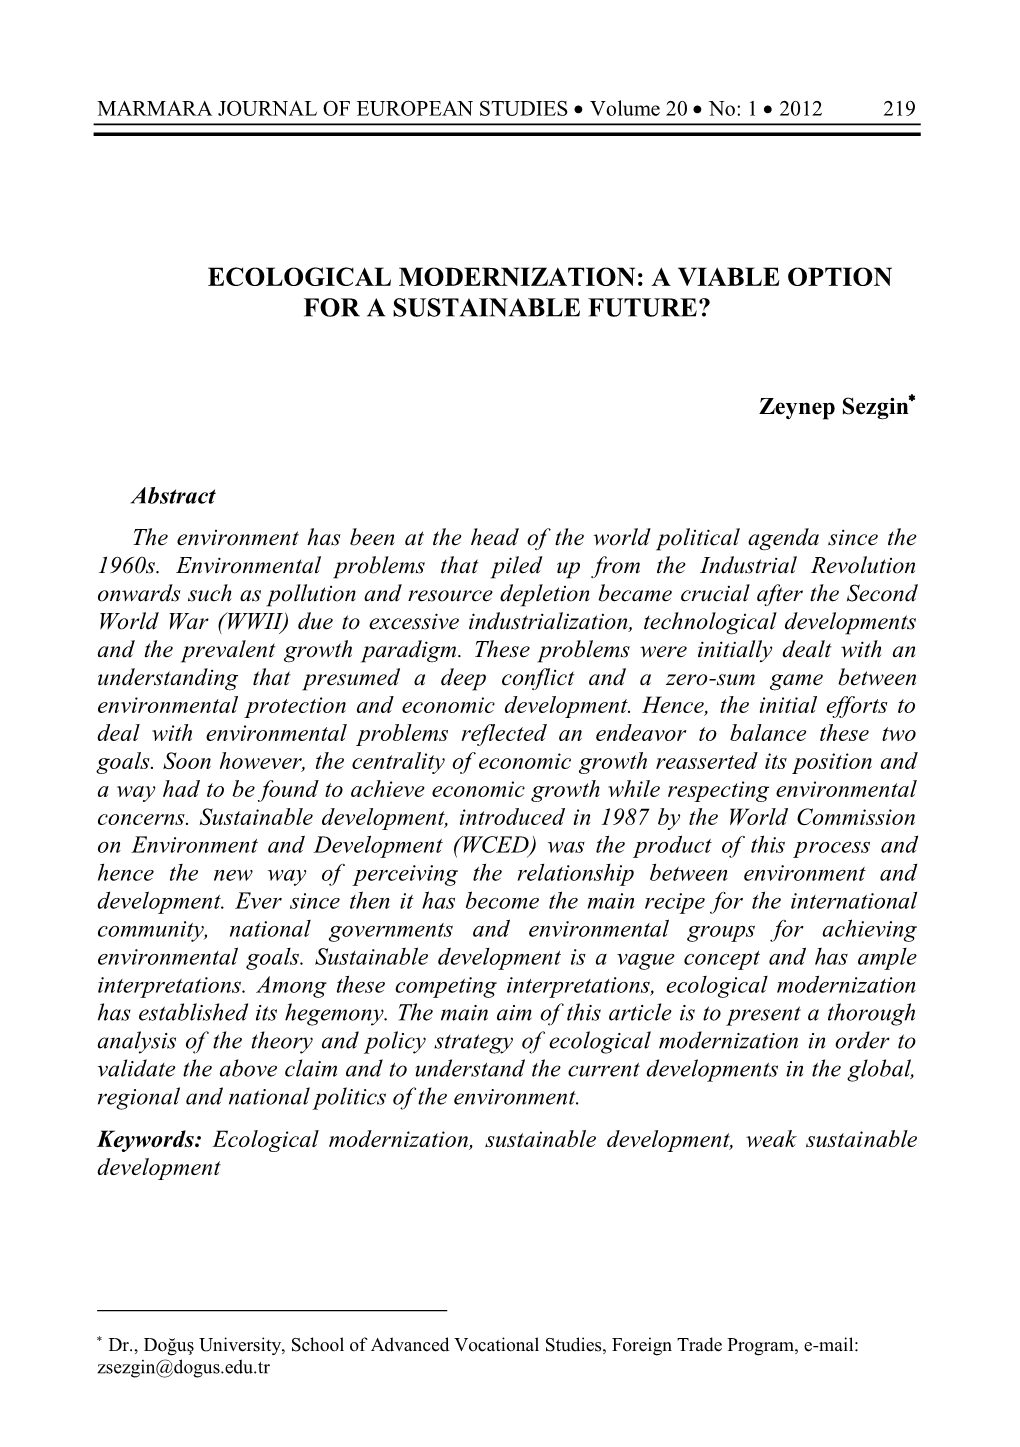 Ecological Modernization: a Viable Option for a Sustainable Future?